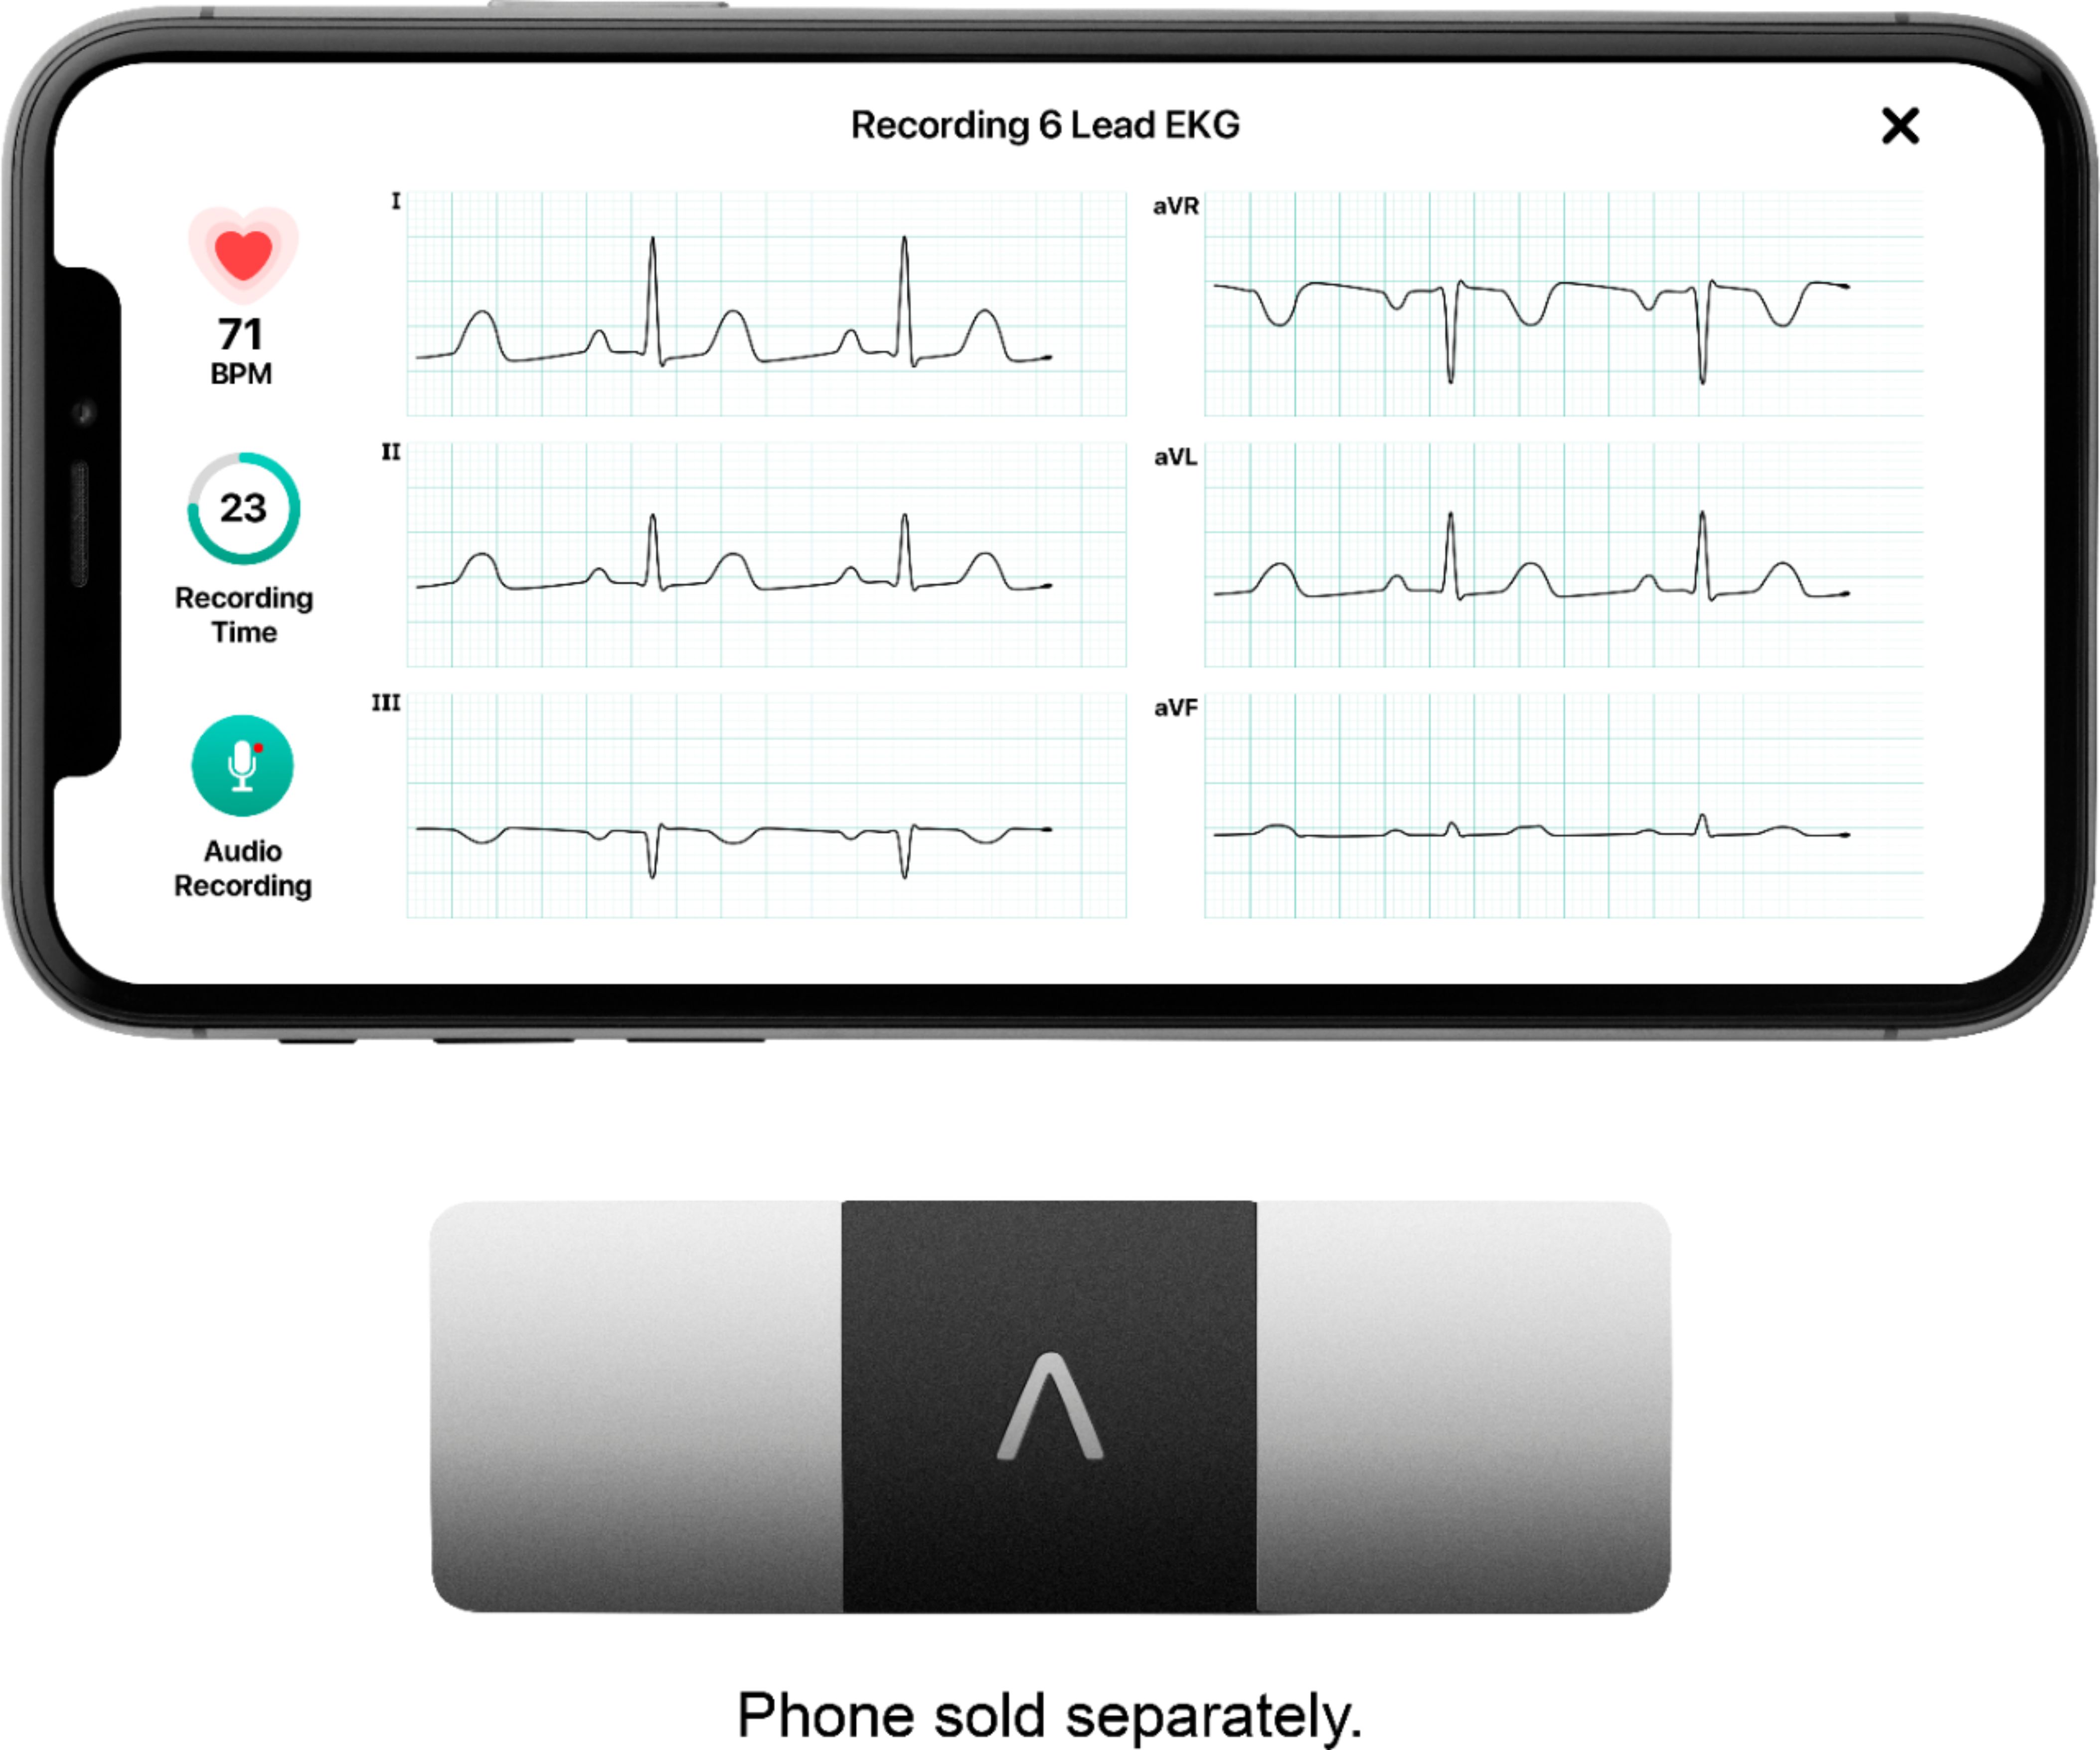  iGuerburn Protective Case for AliveCor KardiaMobile 6-Lead  Personal EKG, Heart Monitor Case for Kardia Mobile 6L ECG (NOT for  KardiaMobile!) : Sports & Outdoors